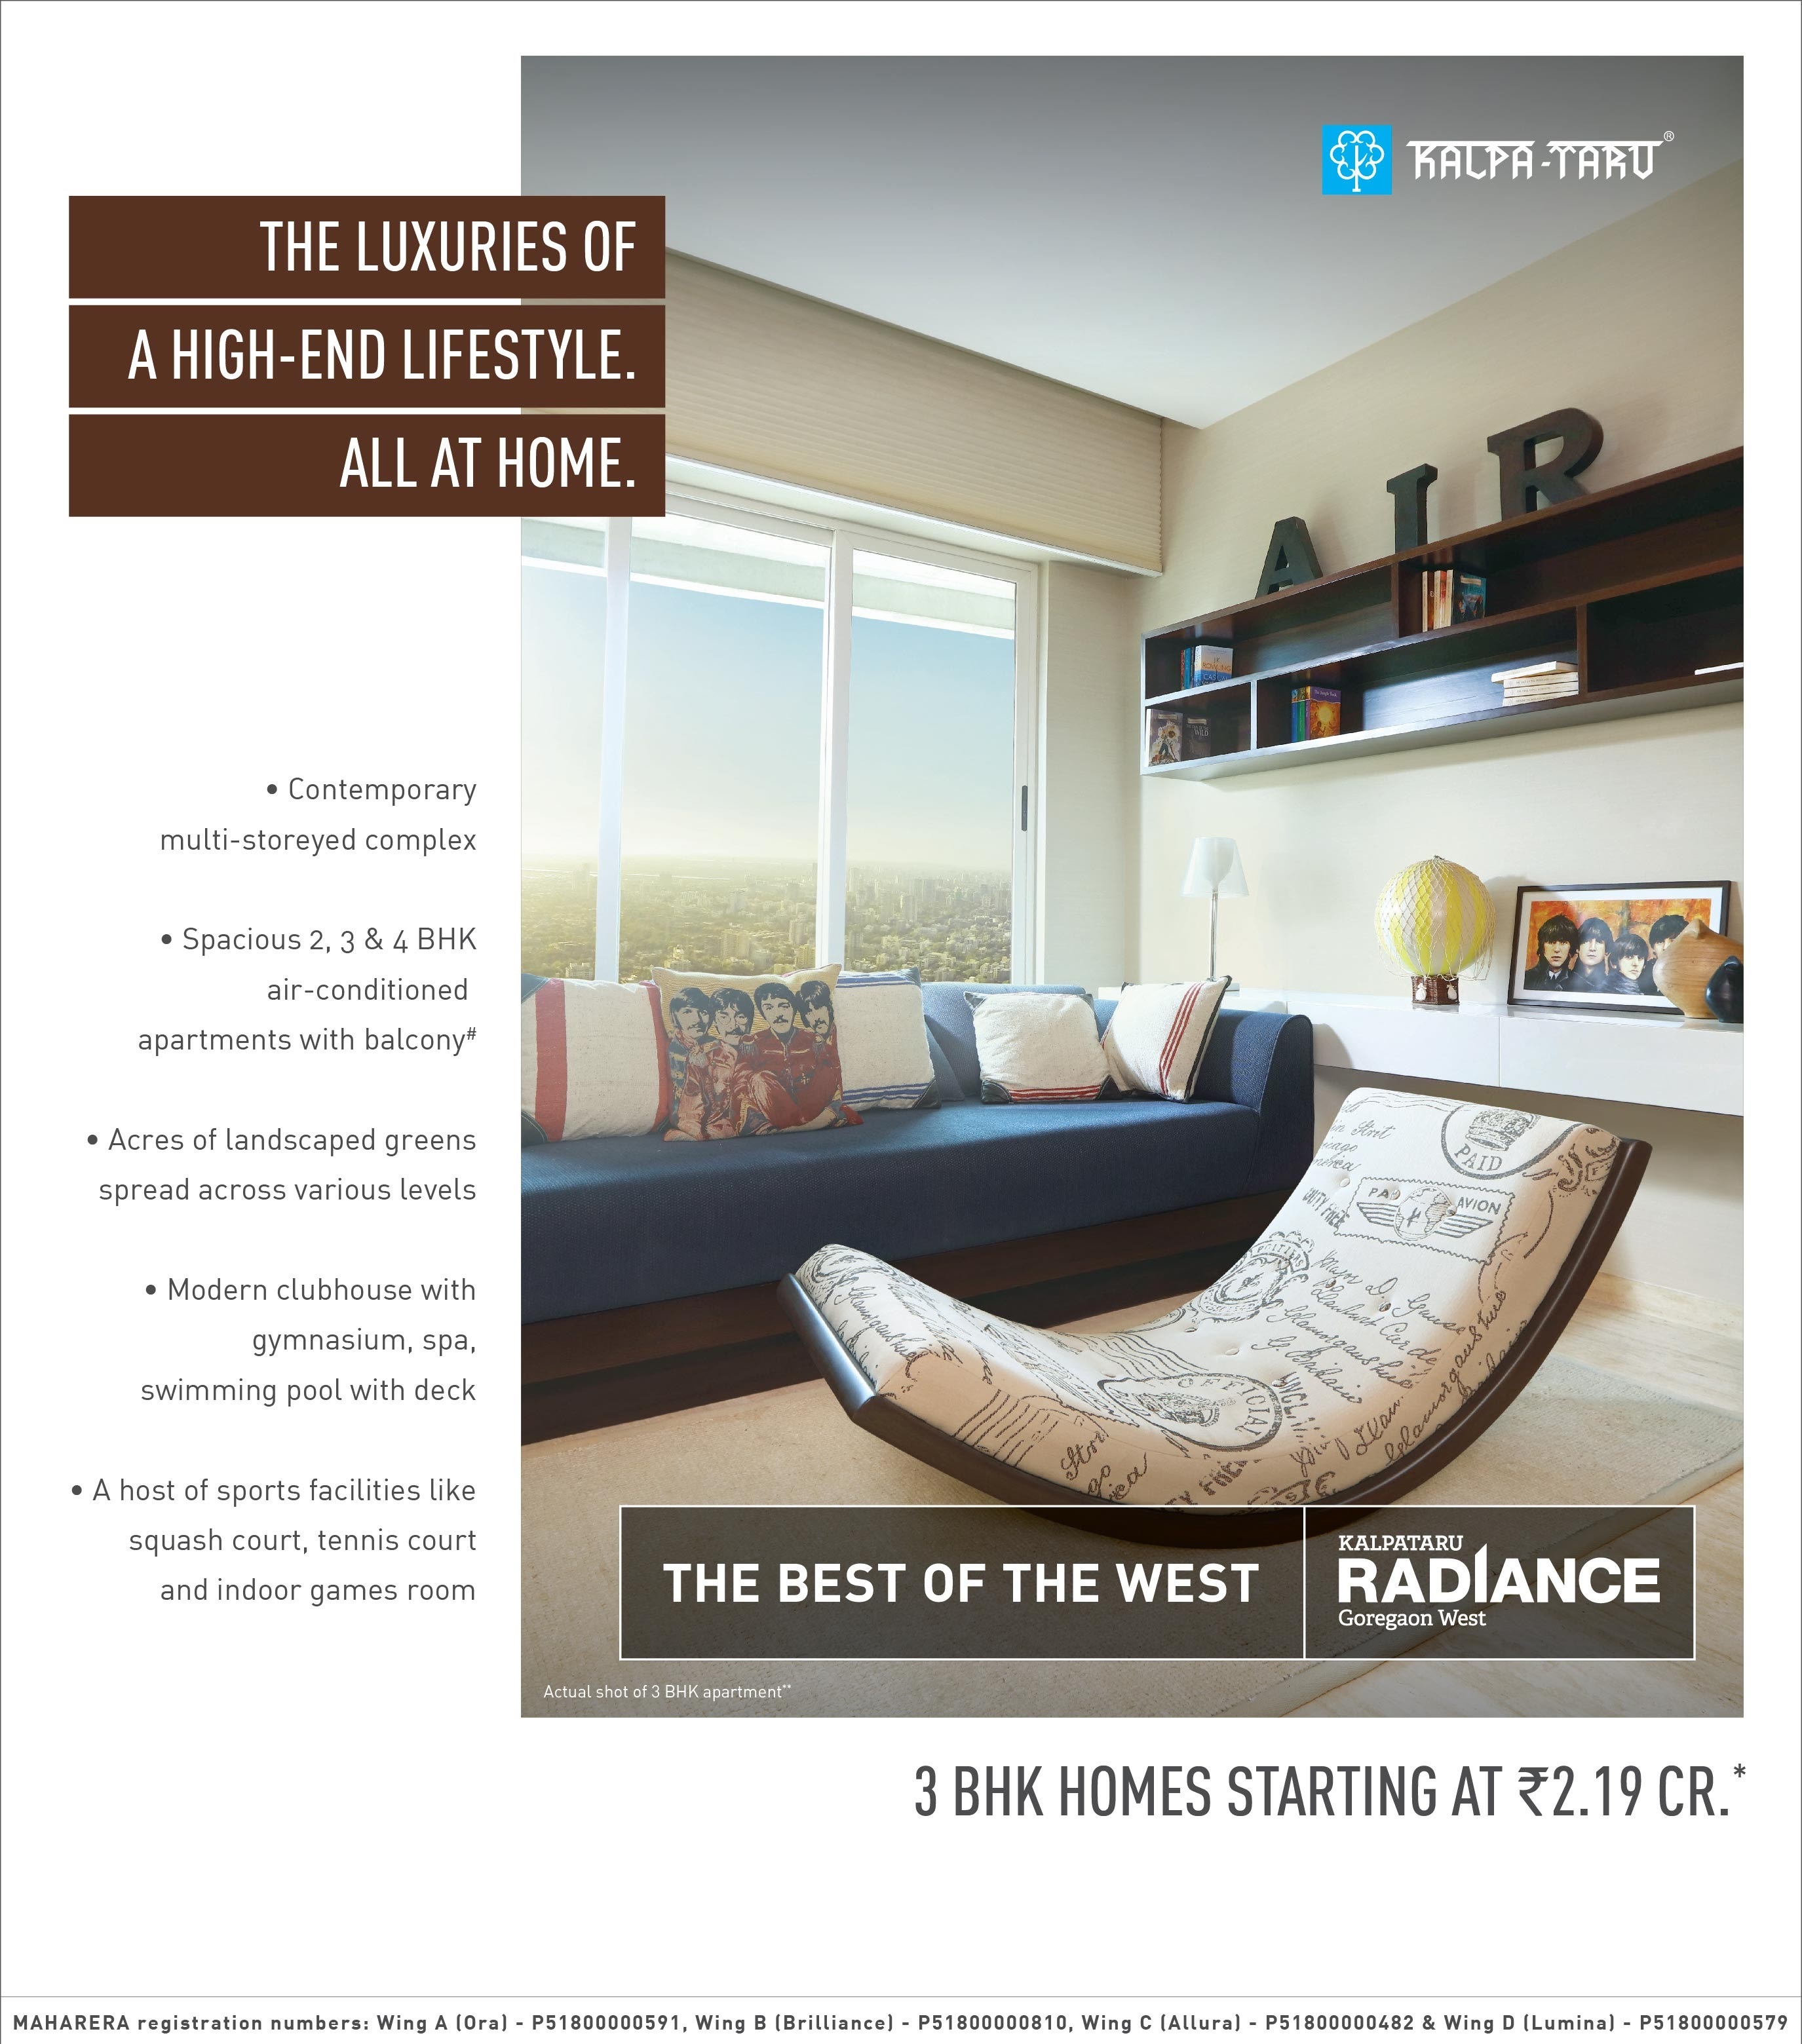 The luxuries of a high-end lifestyle all in home at Kalpataru Radiance in Mumbai Update